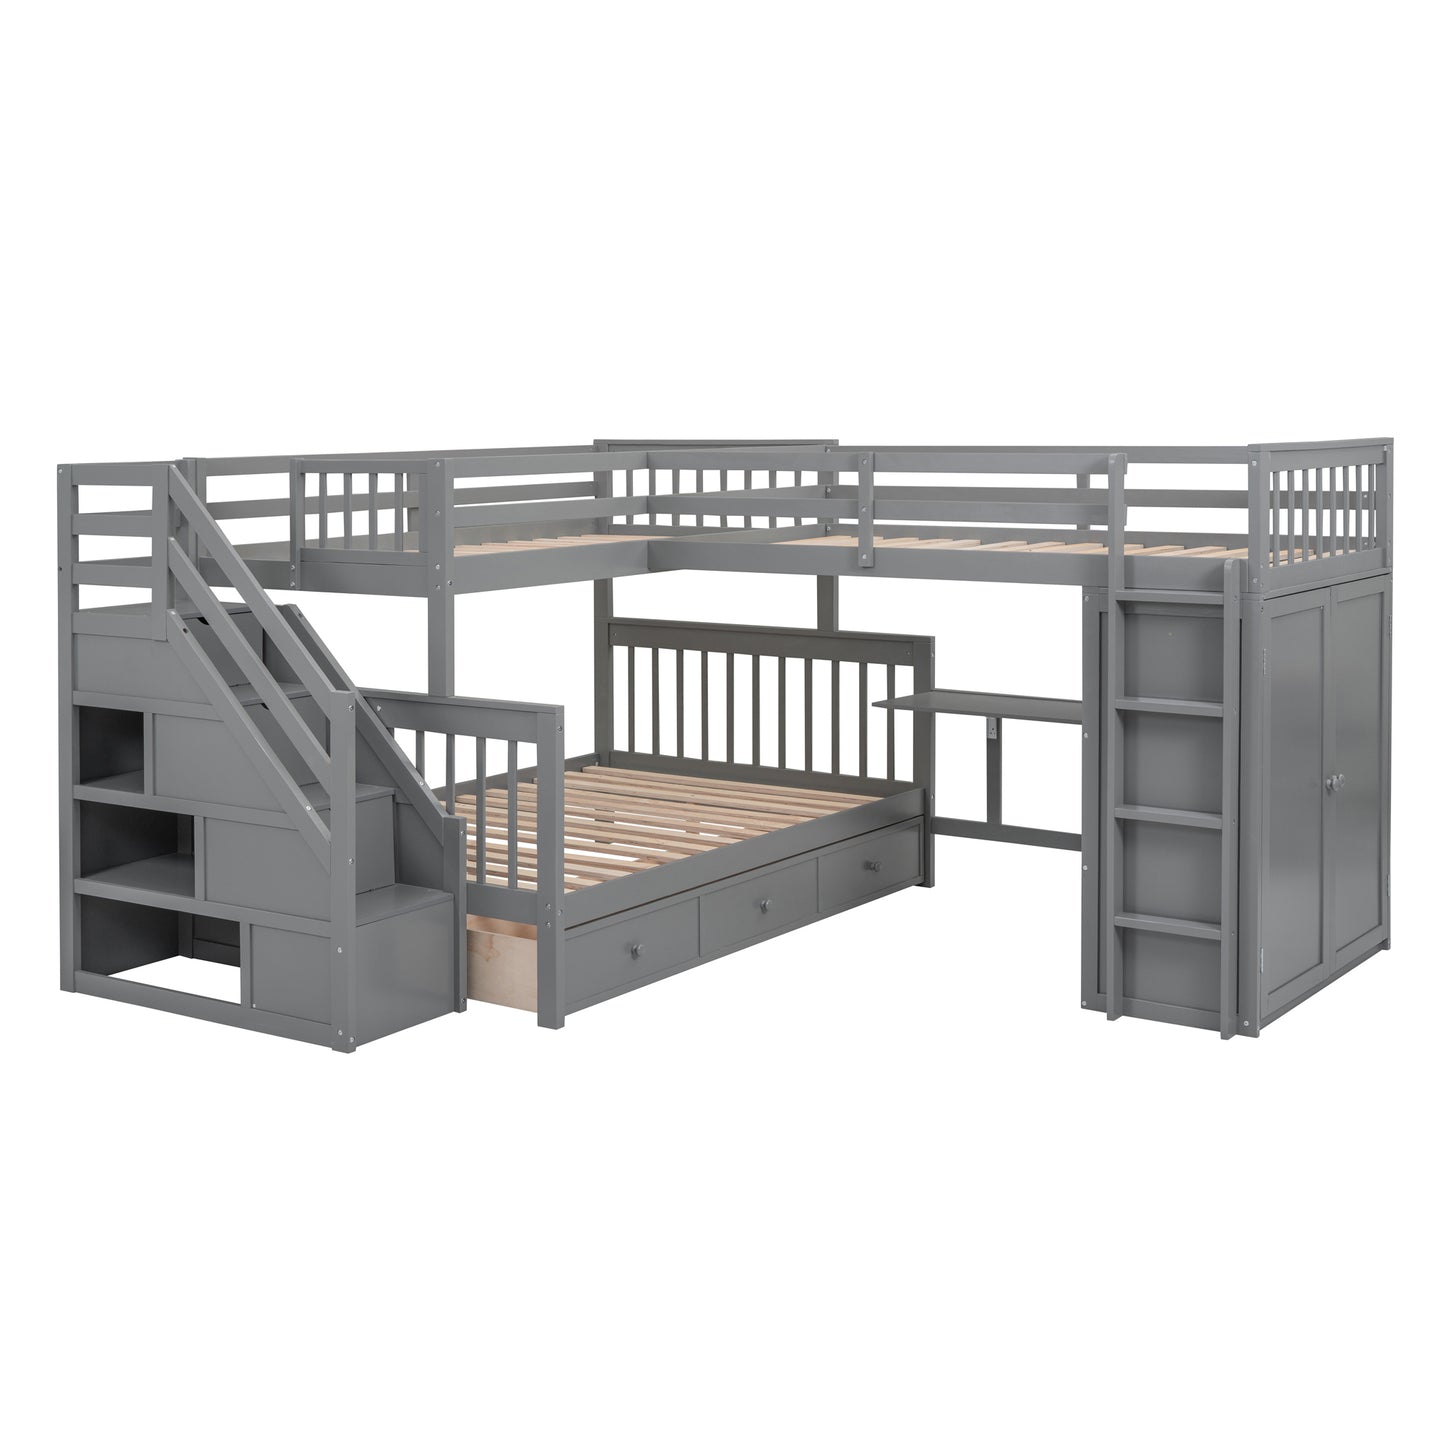 Twin-Twin over Full L-Shaped Bunk Bed With 3 Drawers, Portable Desk and Wardrobe, Gray